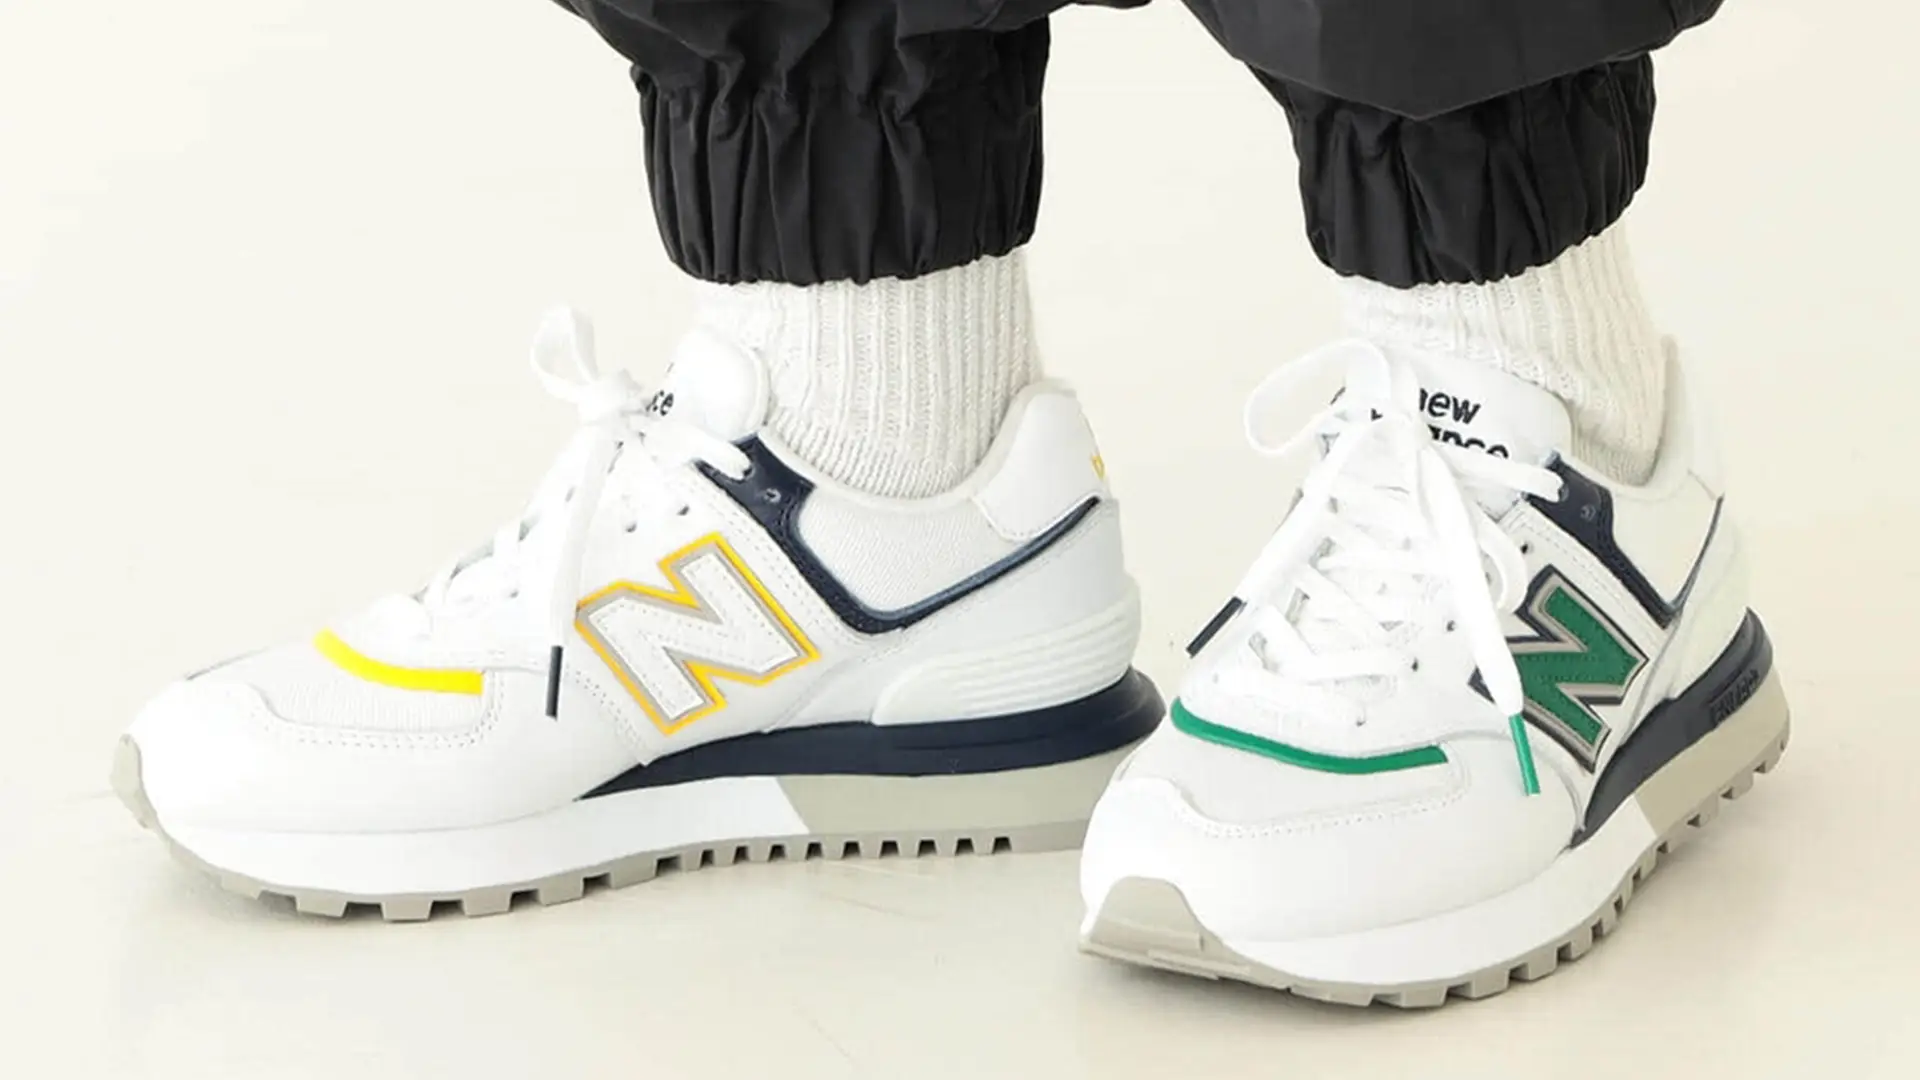 atmos & BEAMS Ready These Upcoming New Balance Collabs | The Sole Supplier